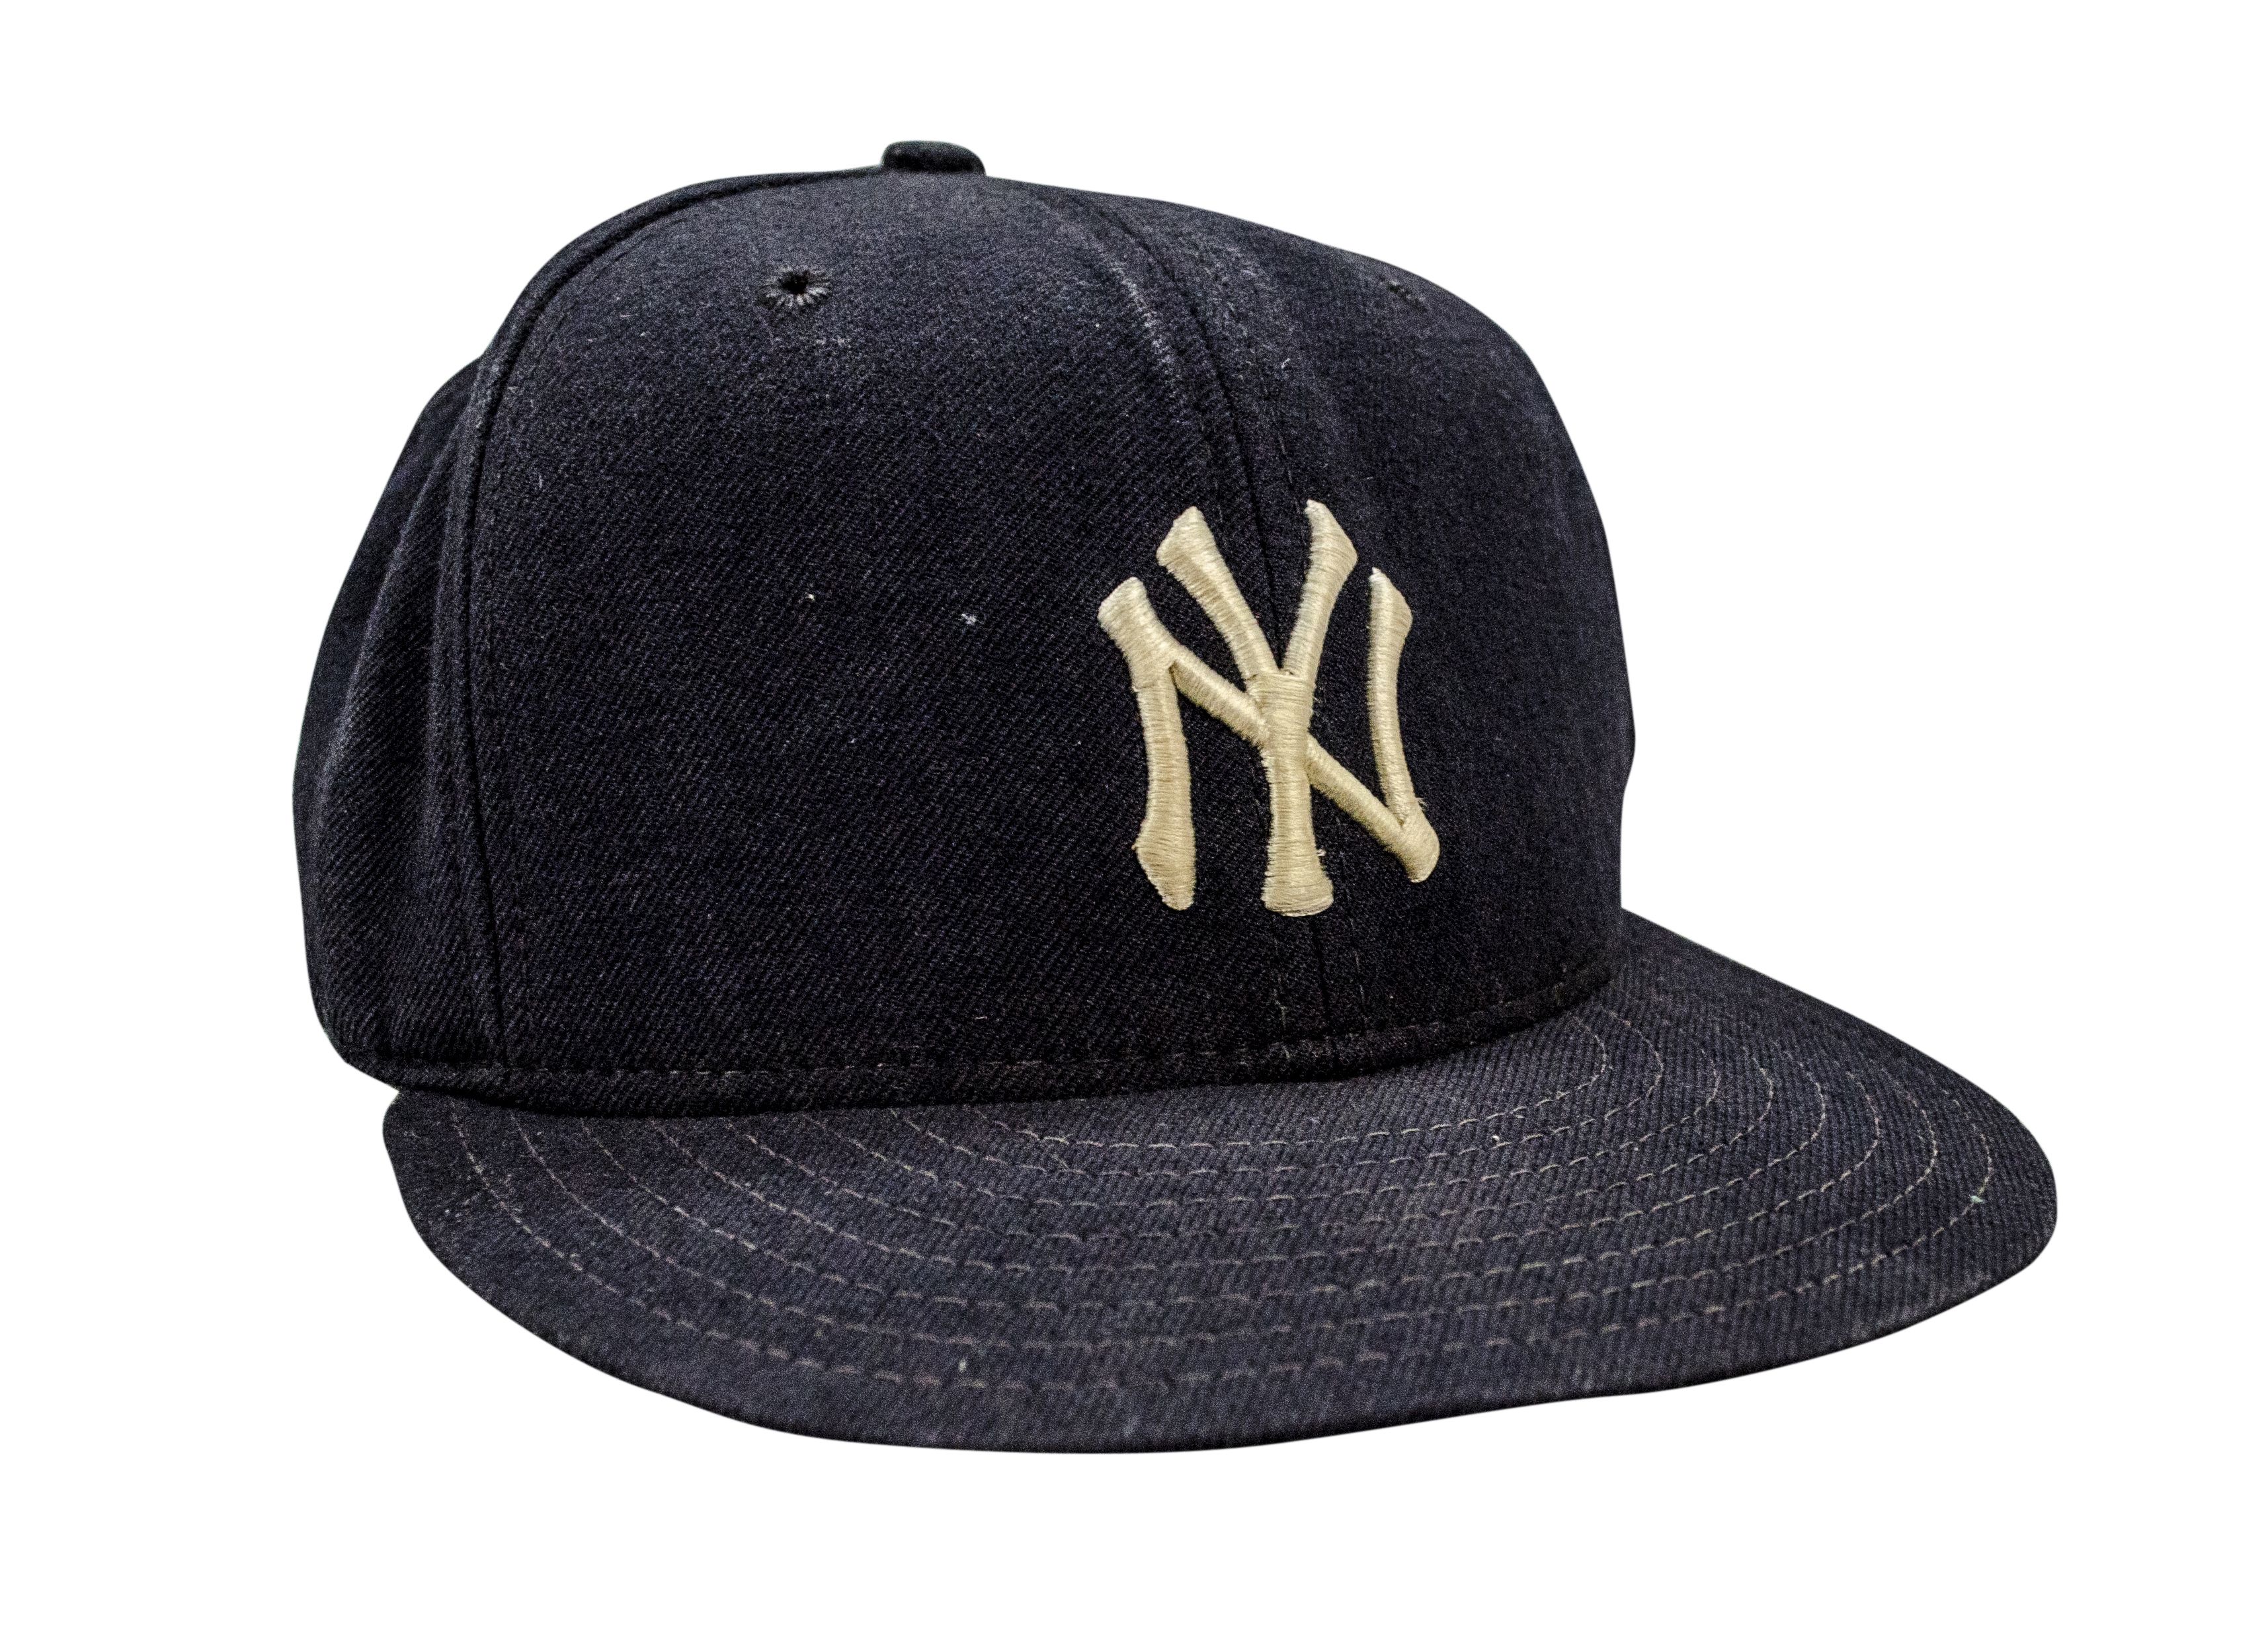 New Era releases Yankees-Spike Lee collection of caps